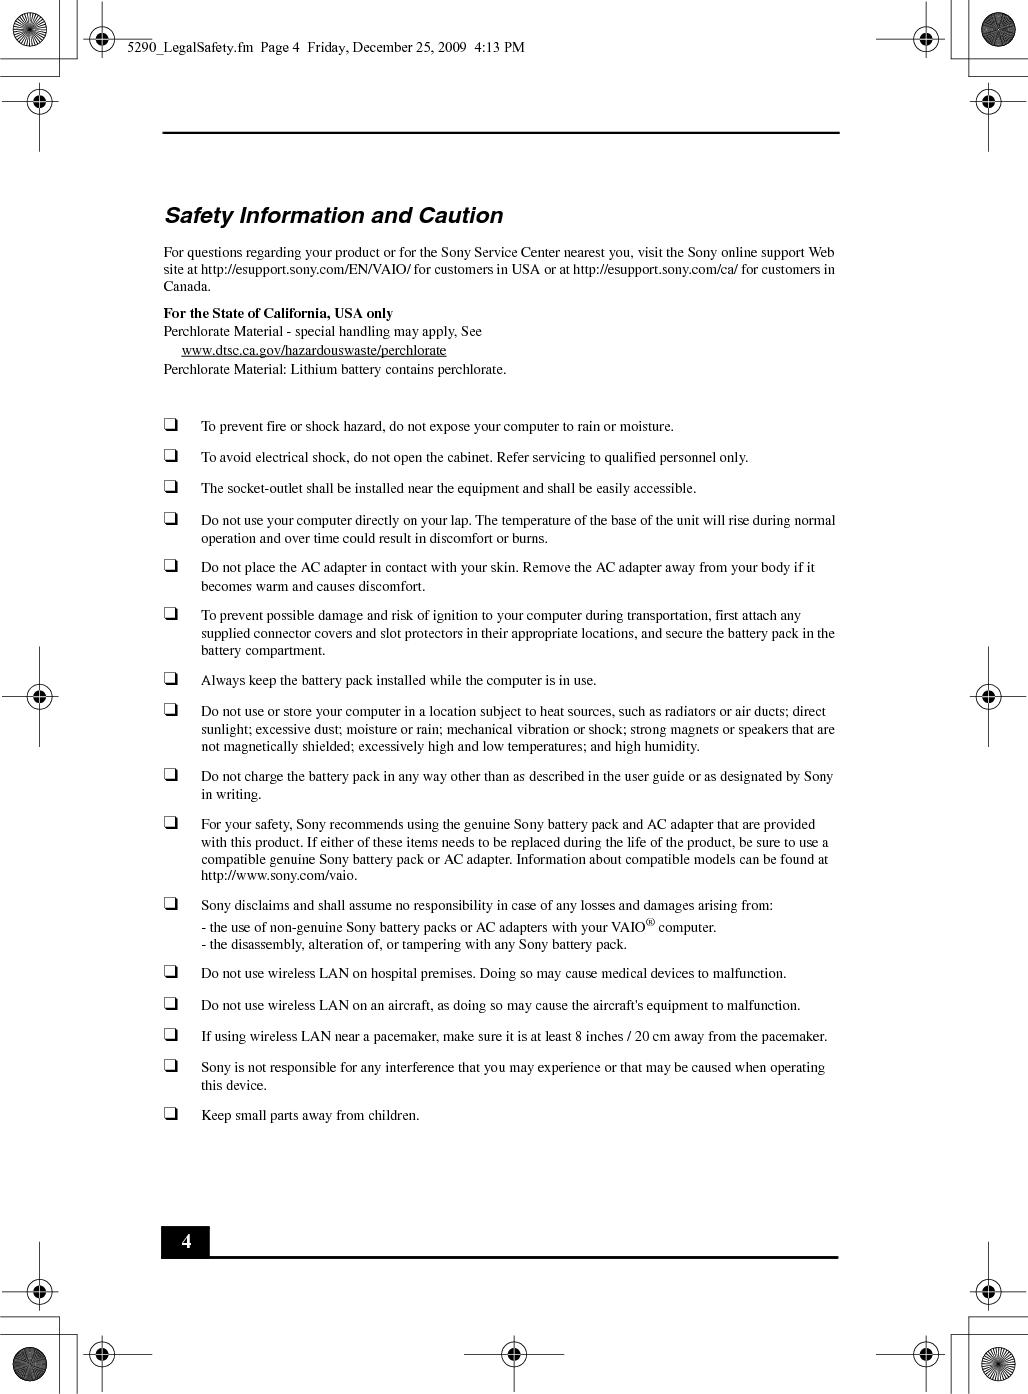 4Safety Information and CautionFor questions regarding your product or for the Sony Service Center nearest you, visit the Sony online support Web site at http://esupport.sony.com/EN/VAIO/ for customers in USA or at http://esupport.sony.com/ca/ for customers in Canada.For the State of California, USA onlyPerchlorate Material - special handling may apply, Seewww.dtsc.ca.gov/hazardouswaste/perchloratePerchlorate Material: Lithium battery contains perchlorate.❑To prevent fire or shock hazard, do not expose your computer to rain or moisture.❑To avoid electrical shock, do not open the cabinet. Refer servicing to qualified personnel only.❑The socket-outlet shall be installed near the equipment and shall be easily accessible.❑Do not use your computer directly on your lap. The temperature of the base of the unit will rise during normal operation and over time could result in discomfort or burns.❑Do not place the AC adapter in contact with your skin. Remove the AC adapter away from your body if it becomes warm and causes discomfort.❑To prevent possible damage and risk of ignition to your computer during transportation, first attach any supplied connector covers and slot protectors in their appropriate locations, and secure the battery pack in the battery compartment.❑Always keep the battery pack installed while the computer is in use.❑Do not use or store your computer in a location subject to heat sources, such as radiators or air ducts; direct sunlight; excessive dust; moisture or rain; mechanical vibration or shock; strong magnets or speakers that are not magnetically shielded; excessively high and low temperatures; and high humidity.❑Do not charge the battery pack in any way other than as described in the user guide or as designated by Sony in writing.❑For your safety, Sony recommends using the genuine Sony battery pack and AC adapter that are provided with this product. If either of these items needs to be replaced during the life of the product, be sure to use a compatible genuine Sony battery pack or AC adapter. Information about compatible models can be found at http://www.sony.com/vaio.❑Sony disclaims and shall assume no responsibility in case of any losses and damages arising from:- the use of non-genuine Sony battery packs or AC adapters with your VAIO® computer.- the disassembly, alteration of, or tampering with any Sony battery pack.❑Do not use wireless LAN on hospital premises. Doing so may cause medical devices to malfunction.❑Do not use wireless LAN on an aircraft, as doing so may cause the aircraft&apos;s equipment to malfunction.❑If using wireless LAN near a pacemaker, make sure it is at least 8 inches / 20 cm away from the pacemaker.❑Sony is not responsible for any interference that you may experience or that may be caused when operating this device.❑Keep small parts away from children.5290_LegalSafety.fm  Page 4  Friday, December 25, 2009  4:13 PM